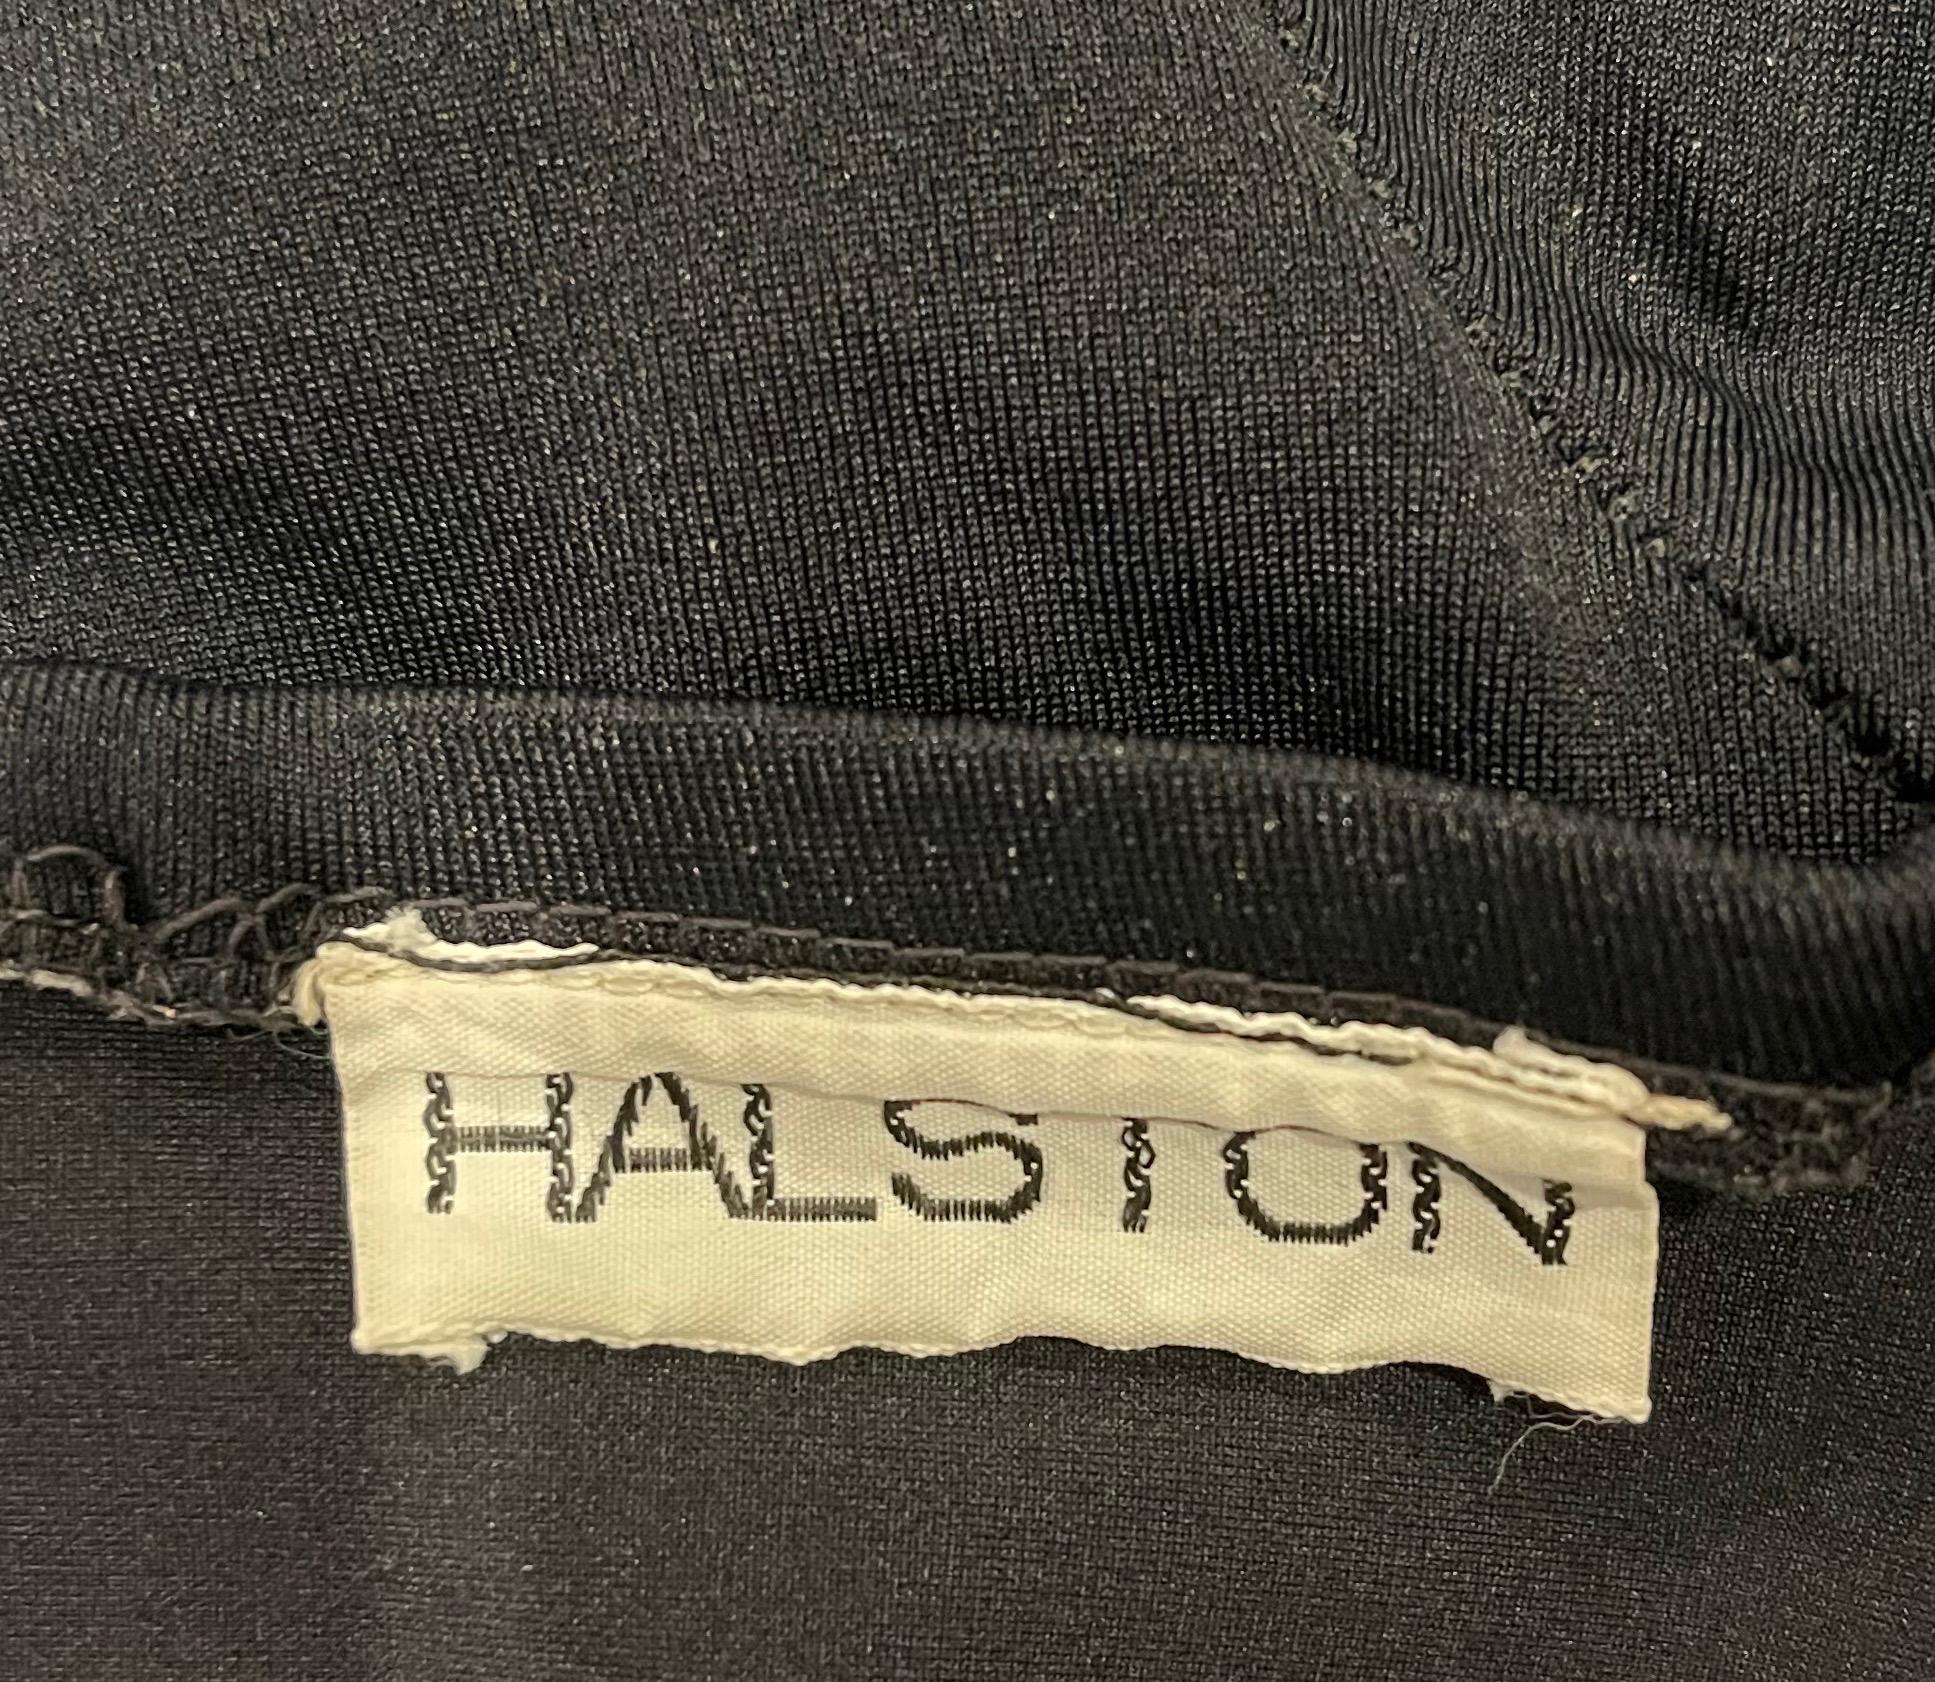 Rare museum piece ! This original 1970s HALSTON black strapless one piece swimsuit comes form an original Halstonette model who wore it for a photo shoot in the 70s. Intricate stitching that flatters the body. Keyhole at center bust with adjustable